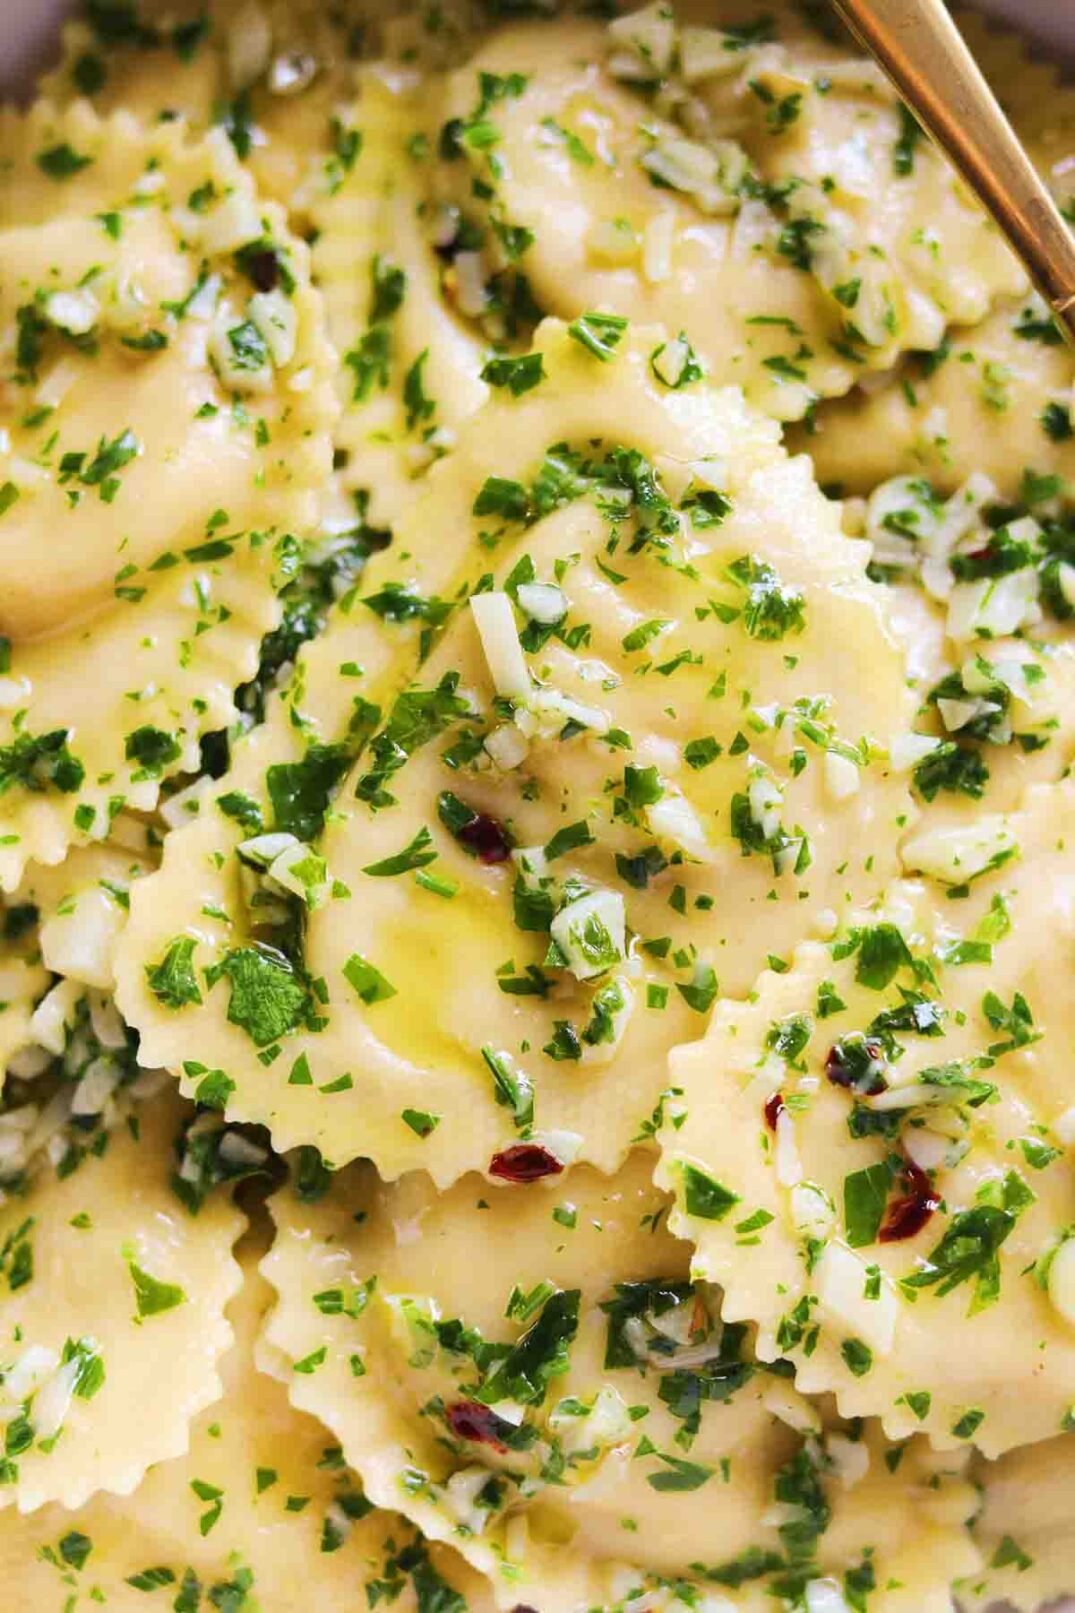 an up close view of Trader Joe's Roasted Cauliflower Ravioli with a parsley garlic olive oil sauce.